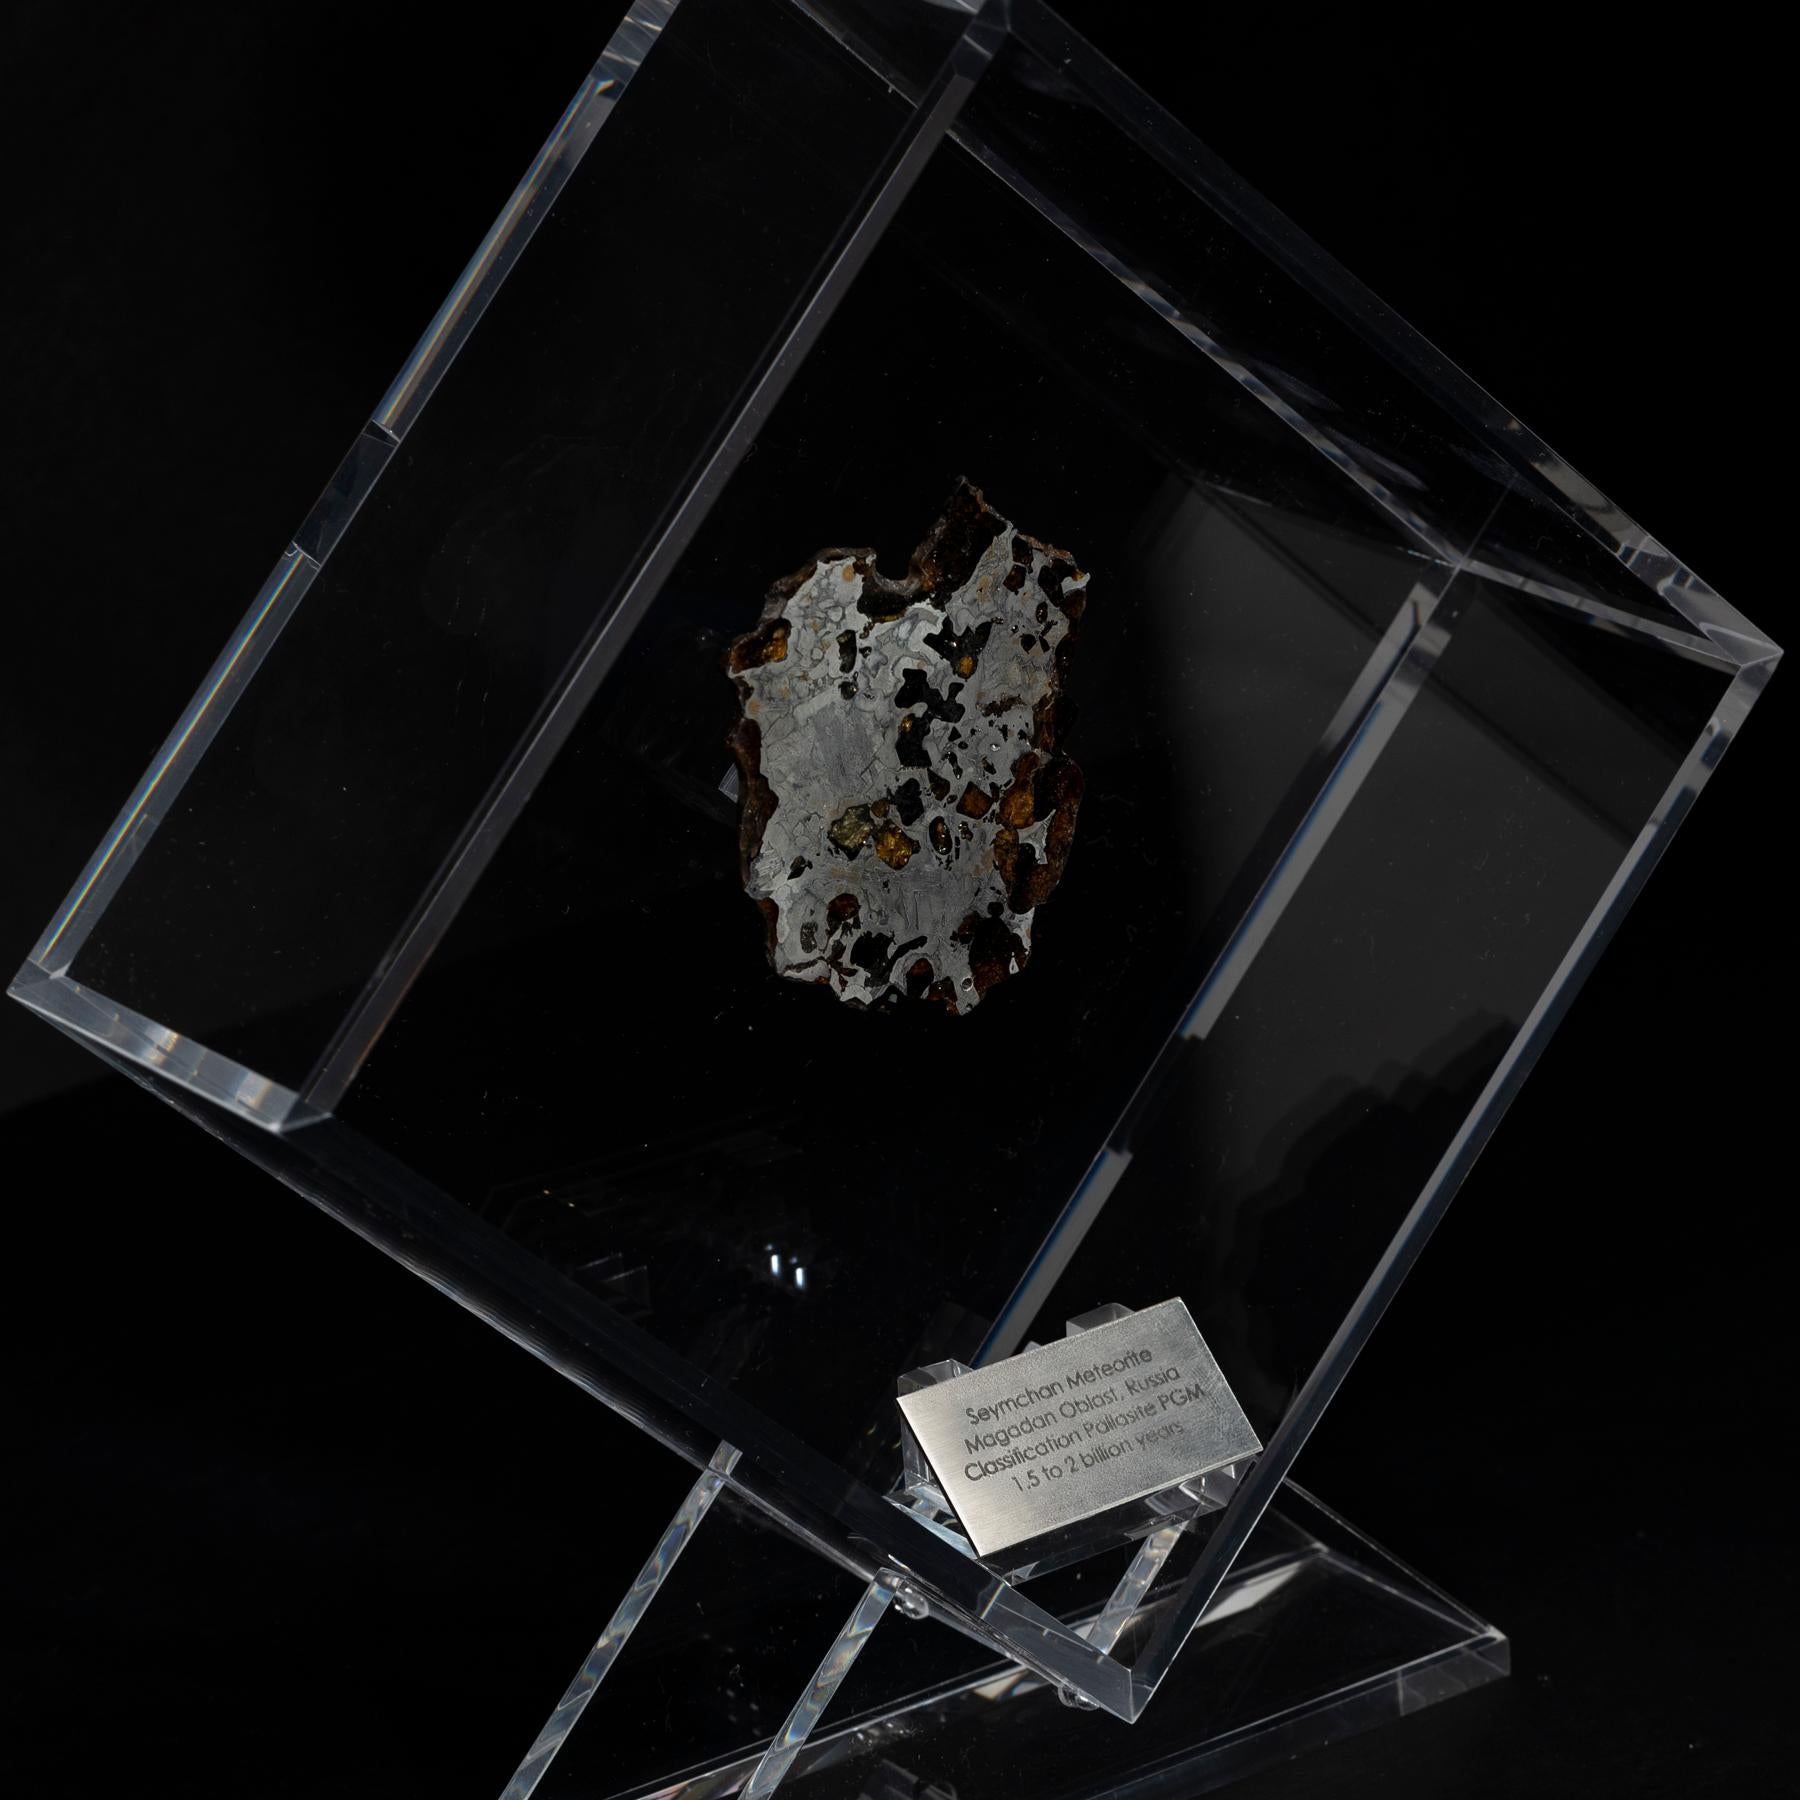 Mexican Original Design, Seymchan with Olivine Meteorite in a Acrylic Display For Sale